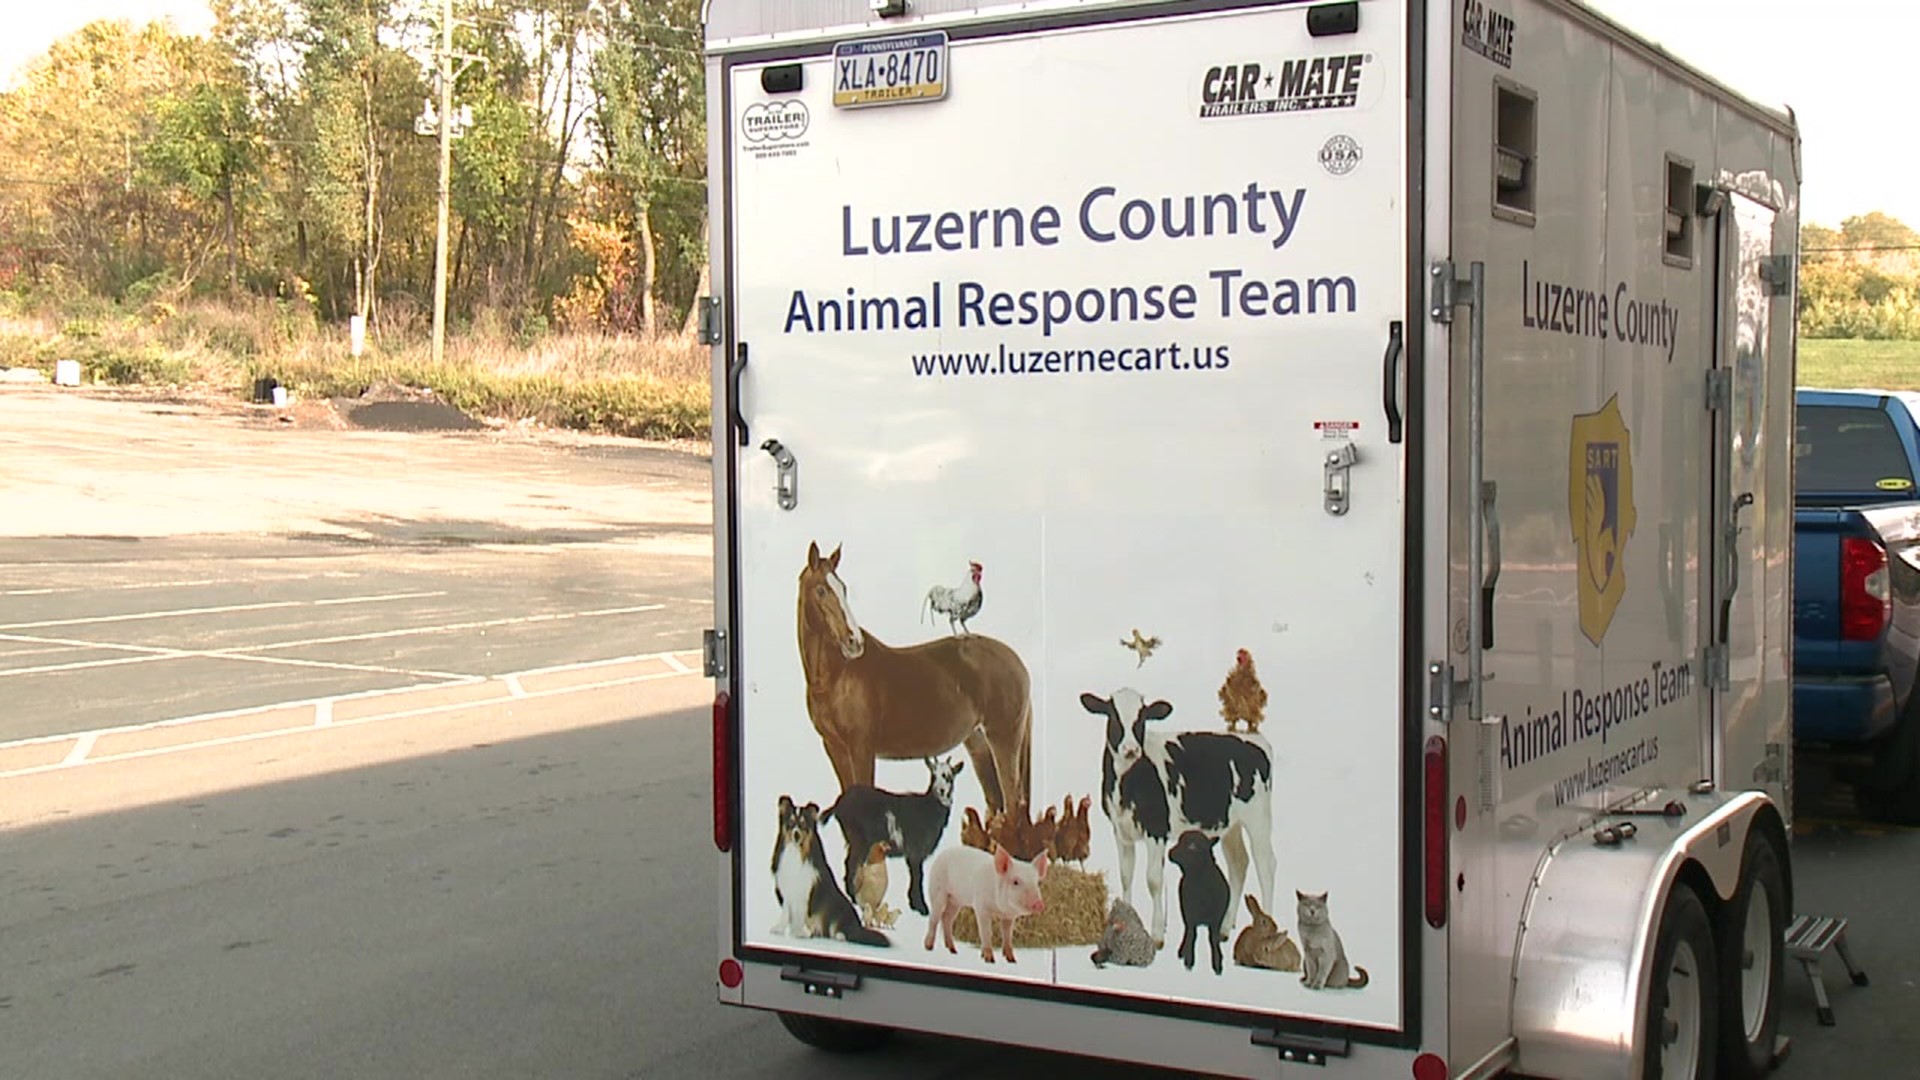 The Luzerne County Animal Response Team started a pet food pantry because of the pandemic. This month, thousands of dollars worth of supplies were stolen.